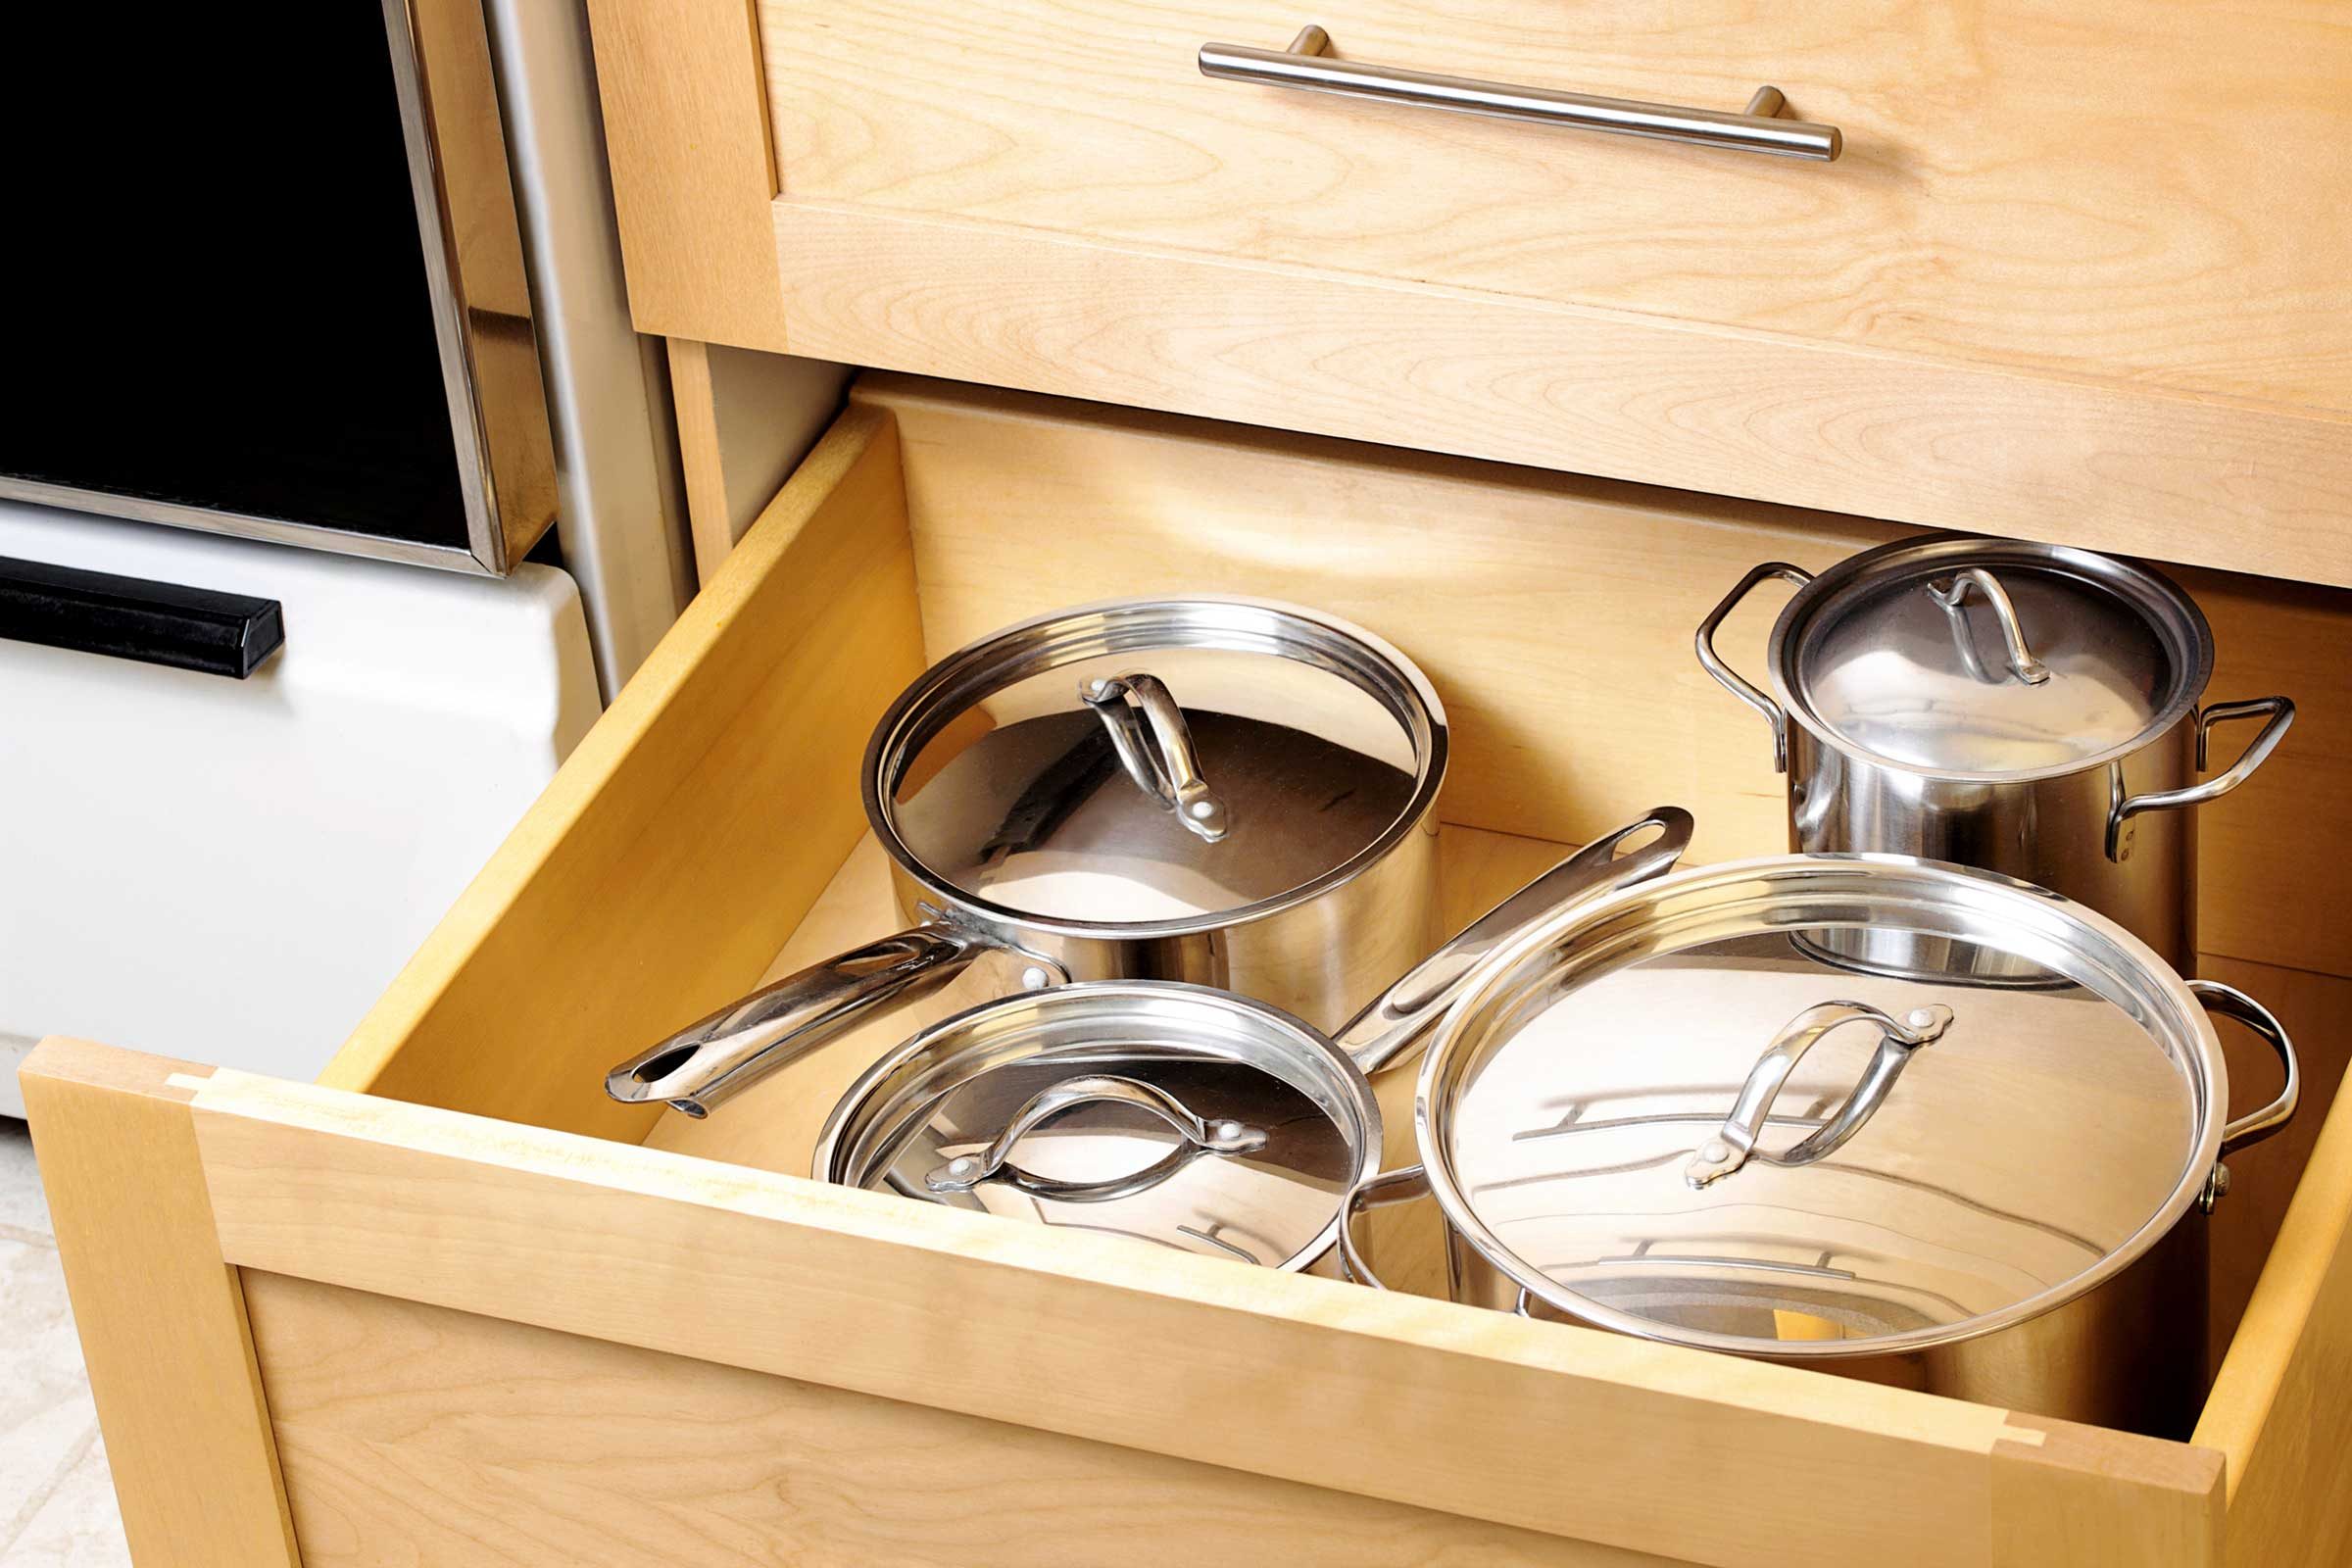 storing pots and pans under the kitchen sink